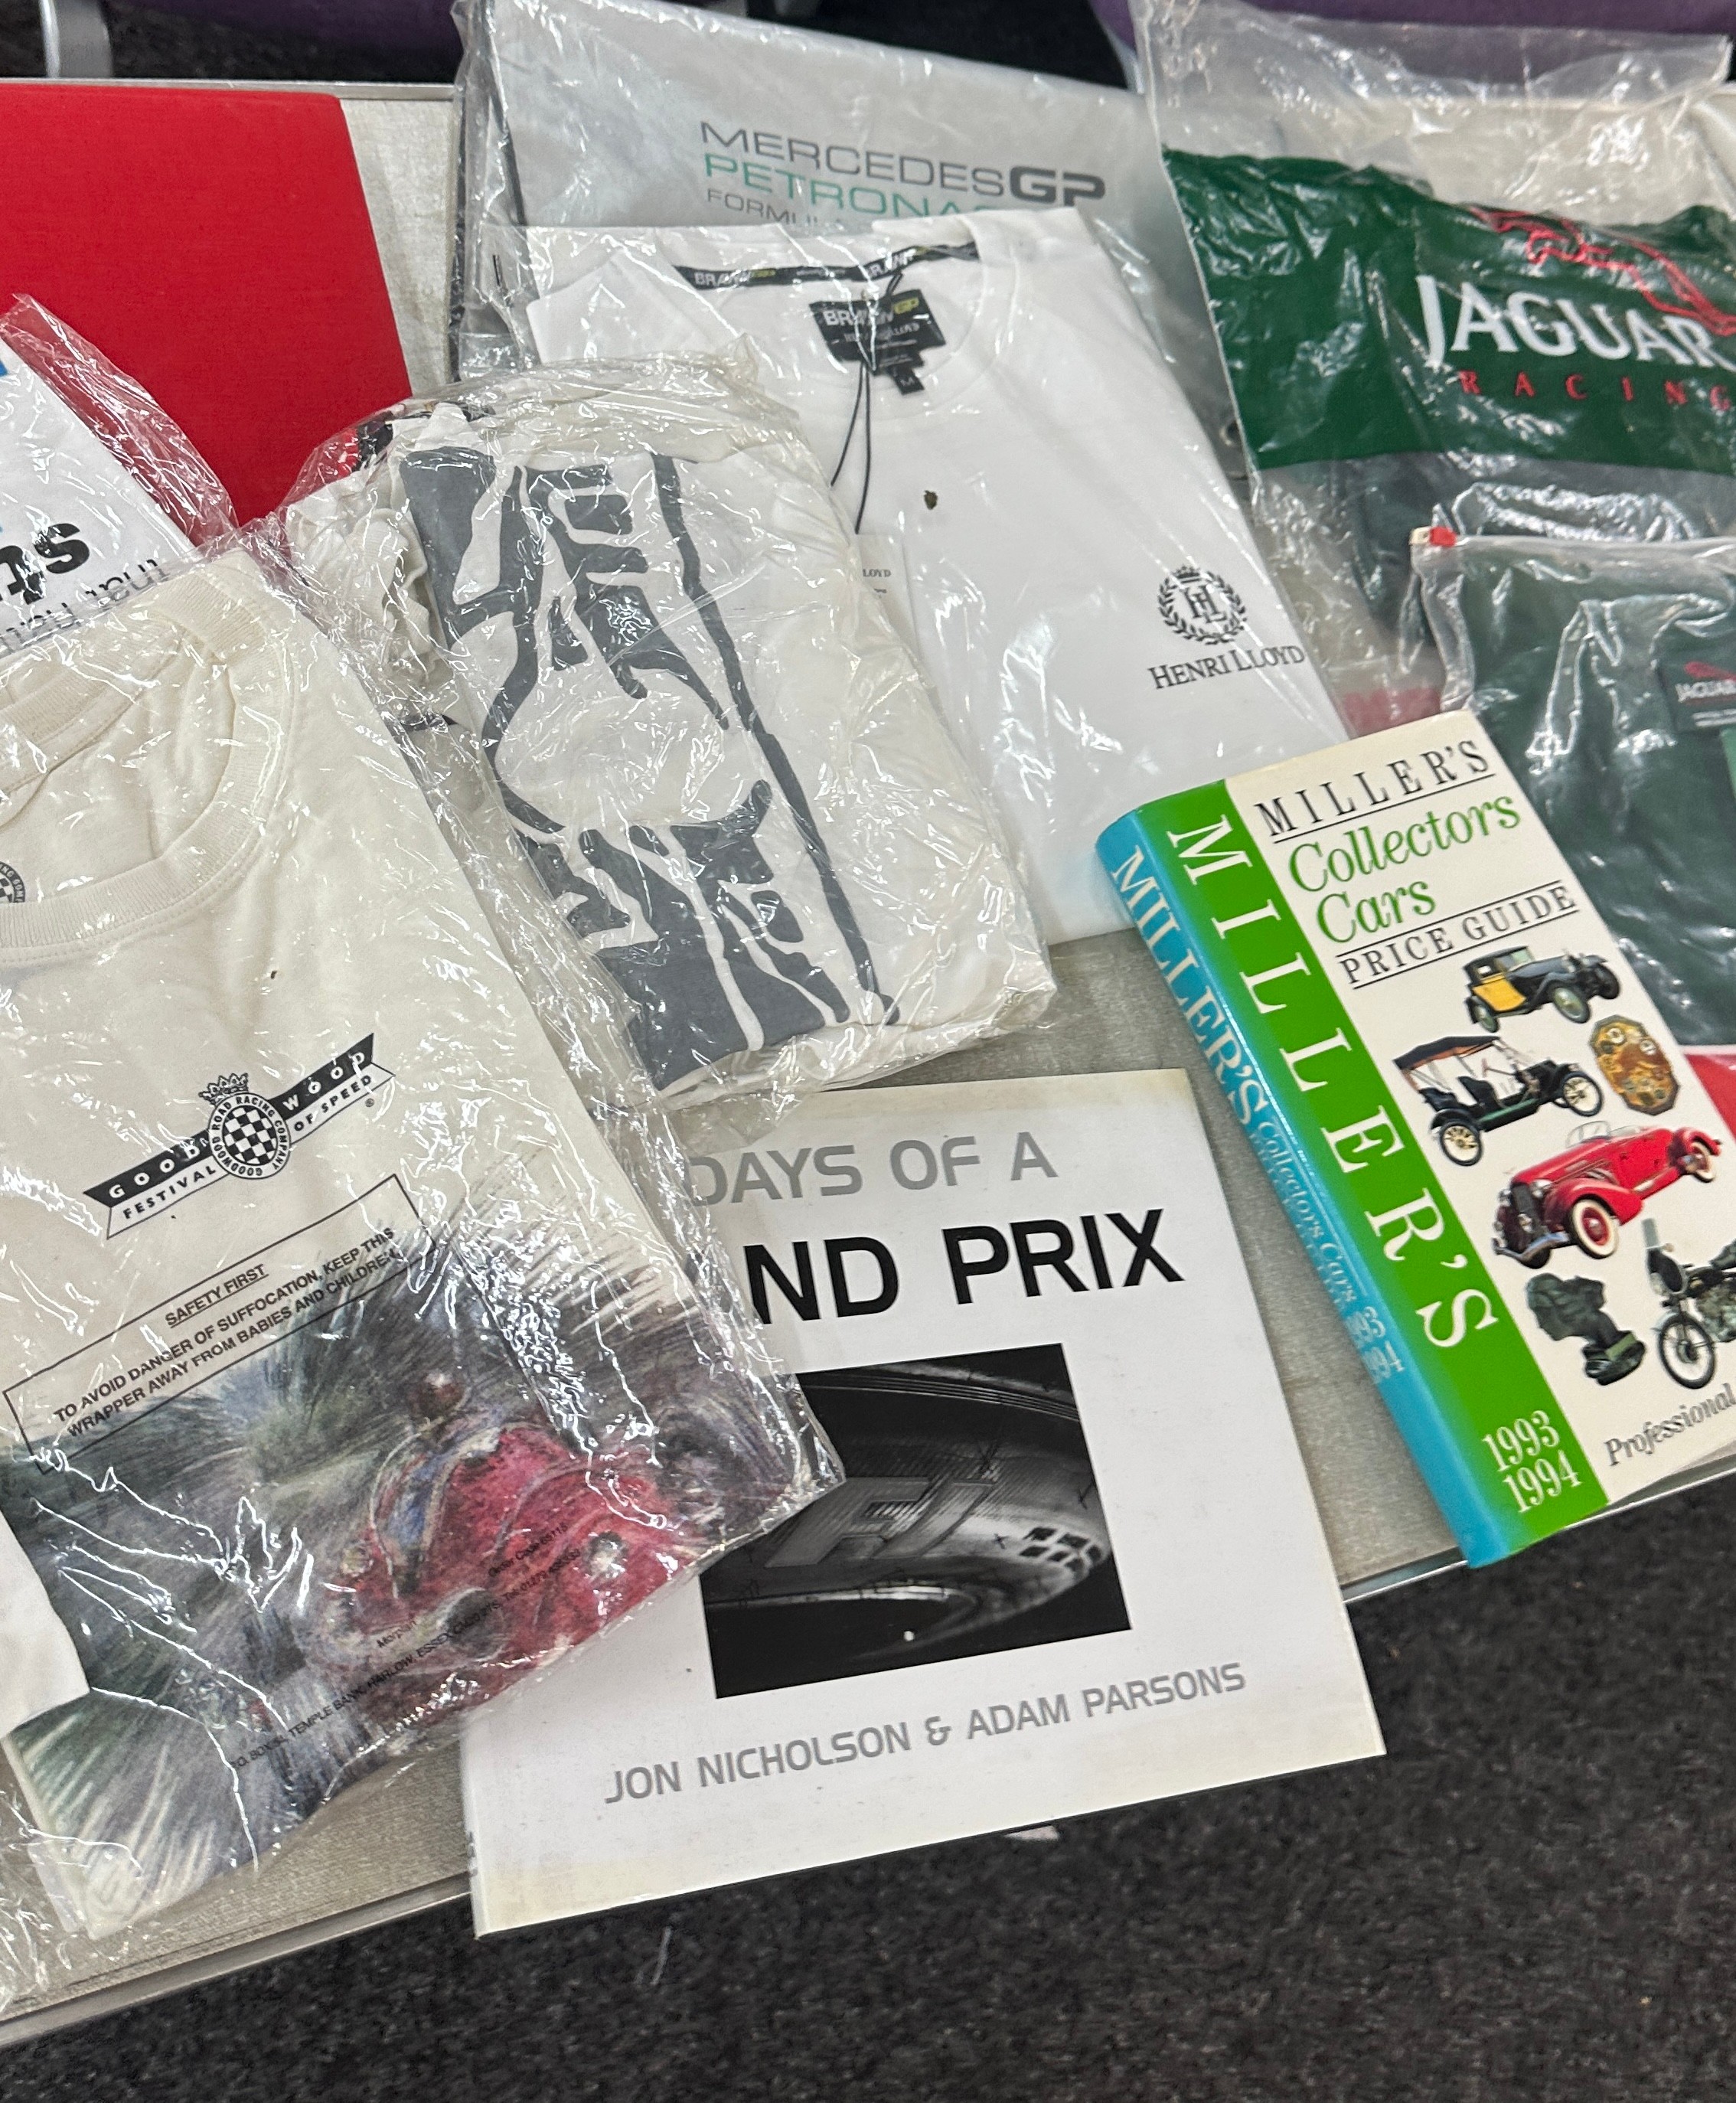 Selection of sports memorabilia includes t shirts, books etc - Image 3 of 4